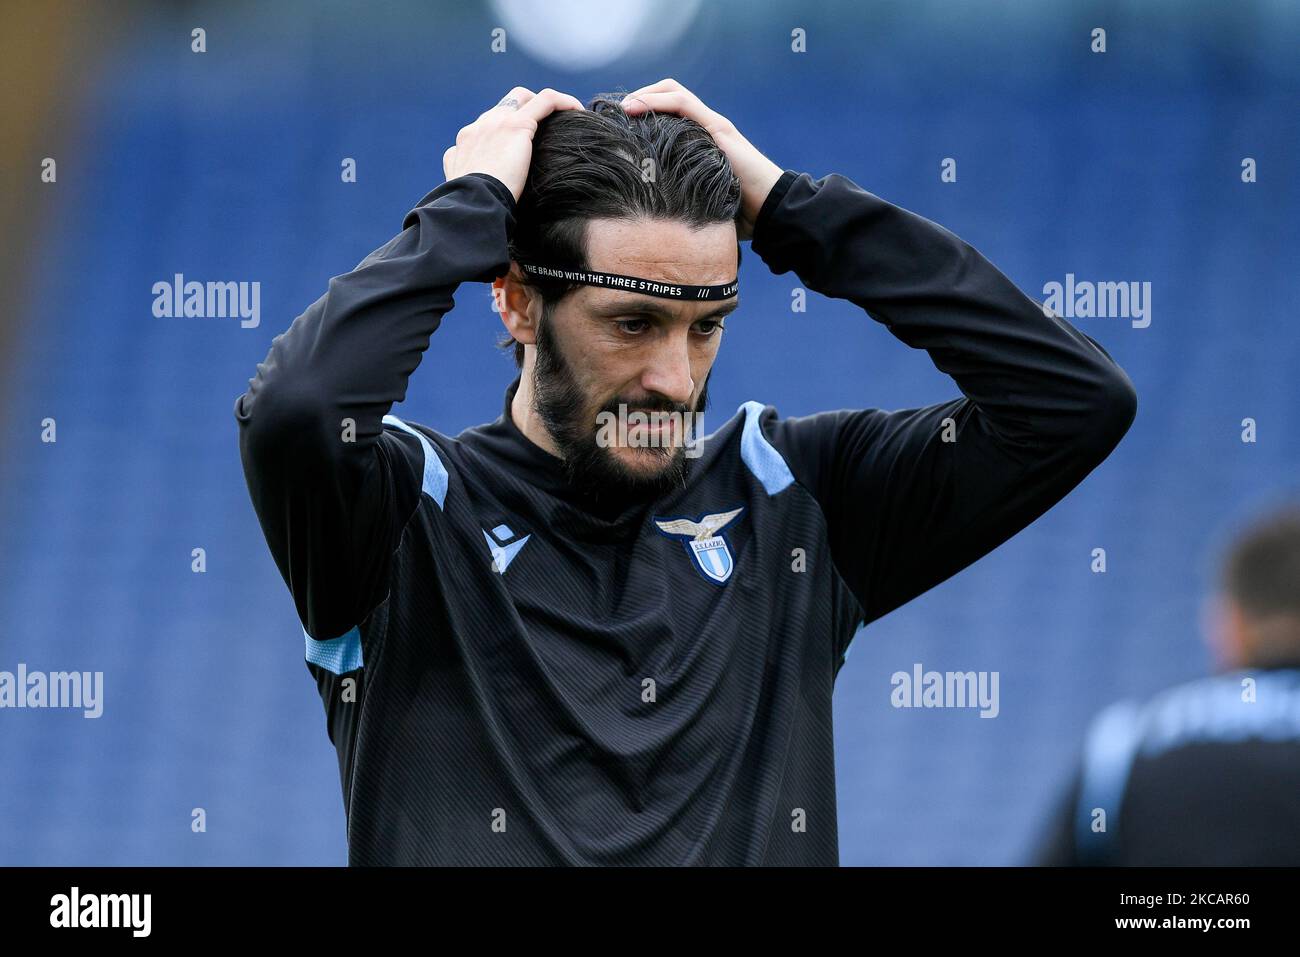 Luis Alberto of SS Lazio wears an Adidas hairband during the Serie A match  between SS Lazio and FC Crotone at Stadio Olimpico, Rome, Italy on 12 March  2021. (Photo by Giuseppe